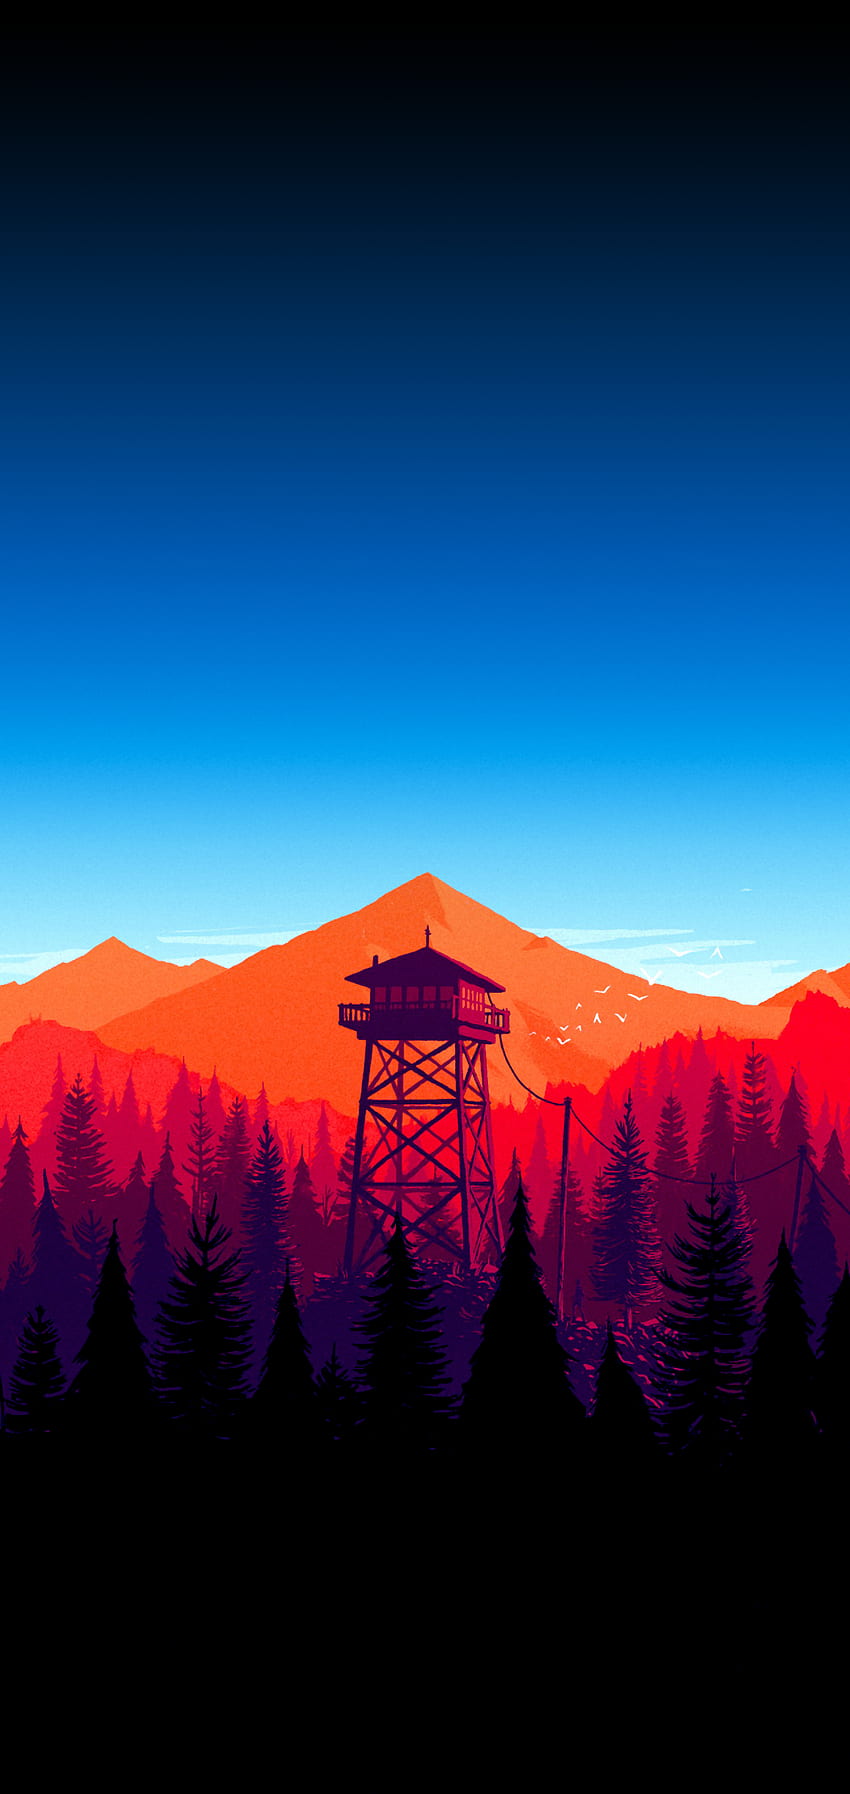 iPhone X (modified to add pure black at top and bottom): Firewatch HD phone wallpaper